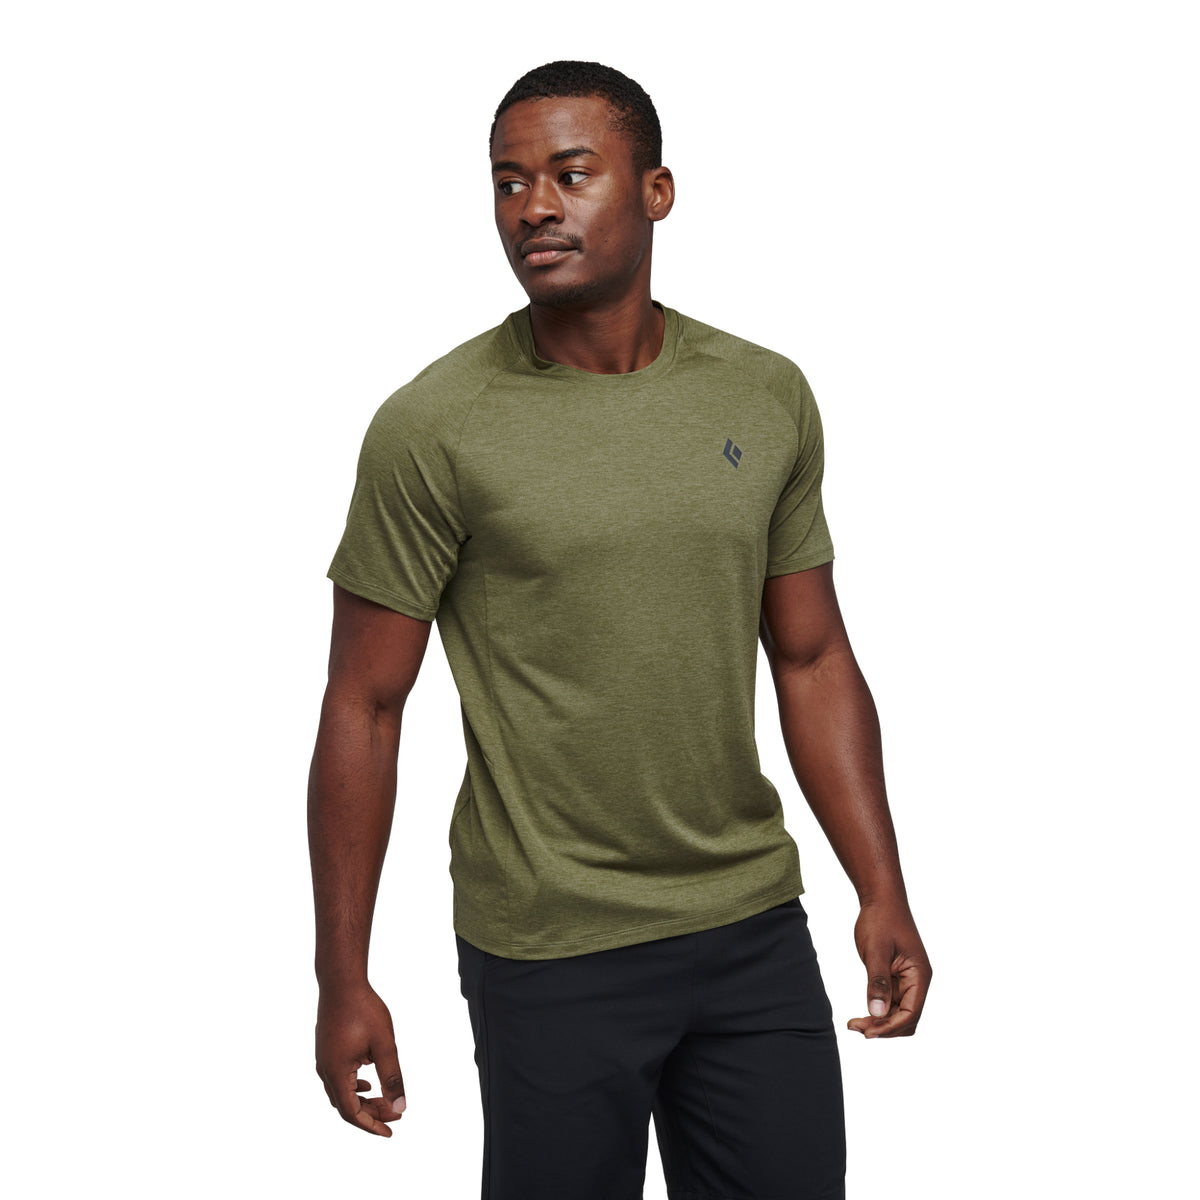 Black Diamond Lightwire SS Tech Tee in crag green with small chest logo